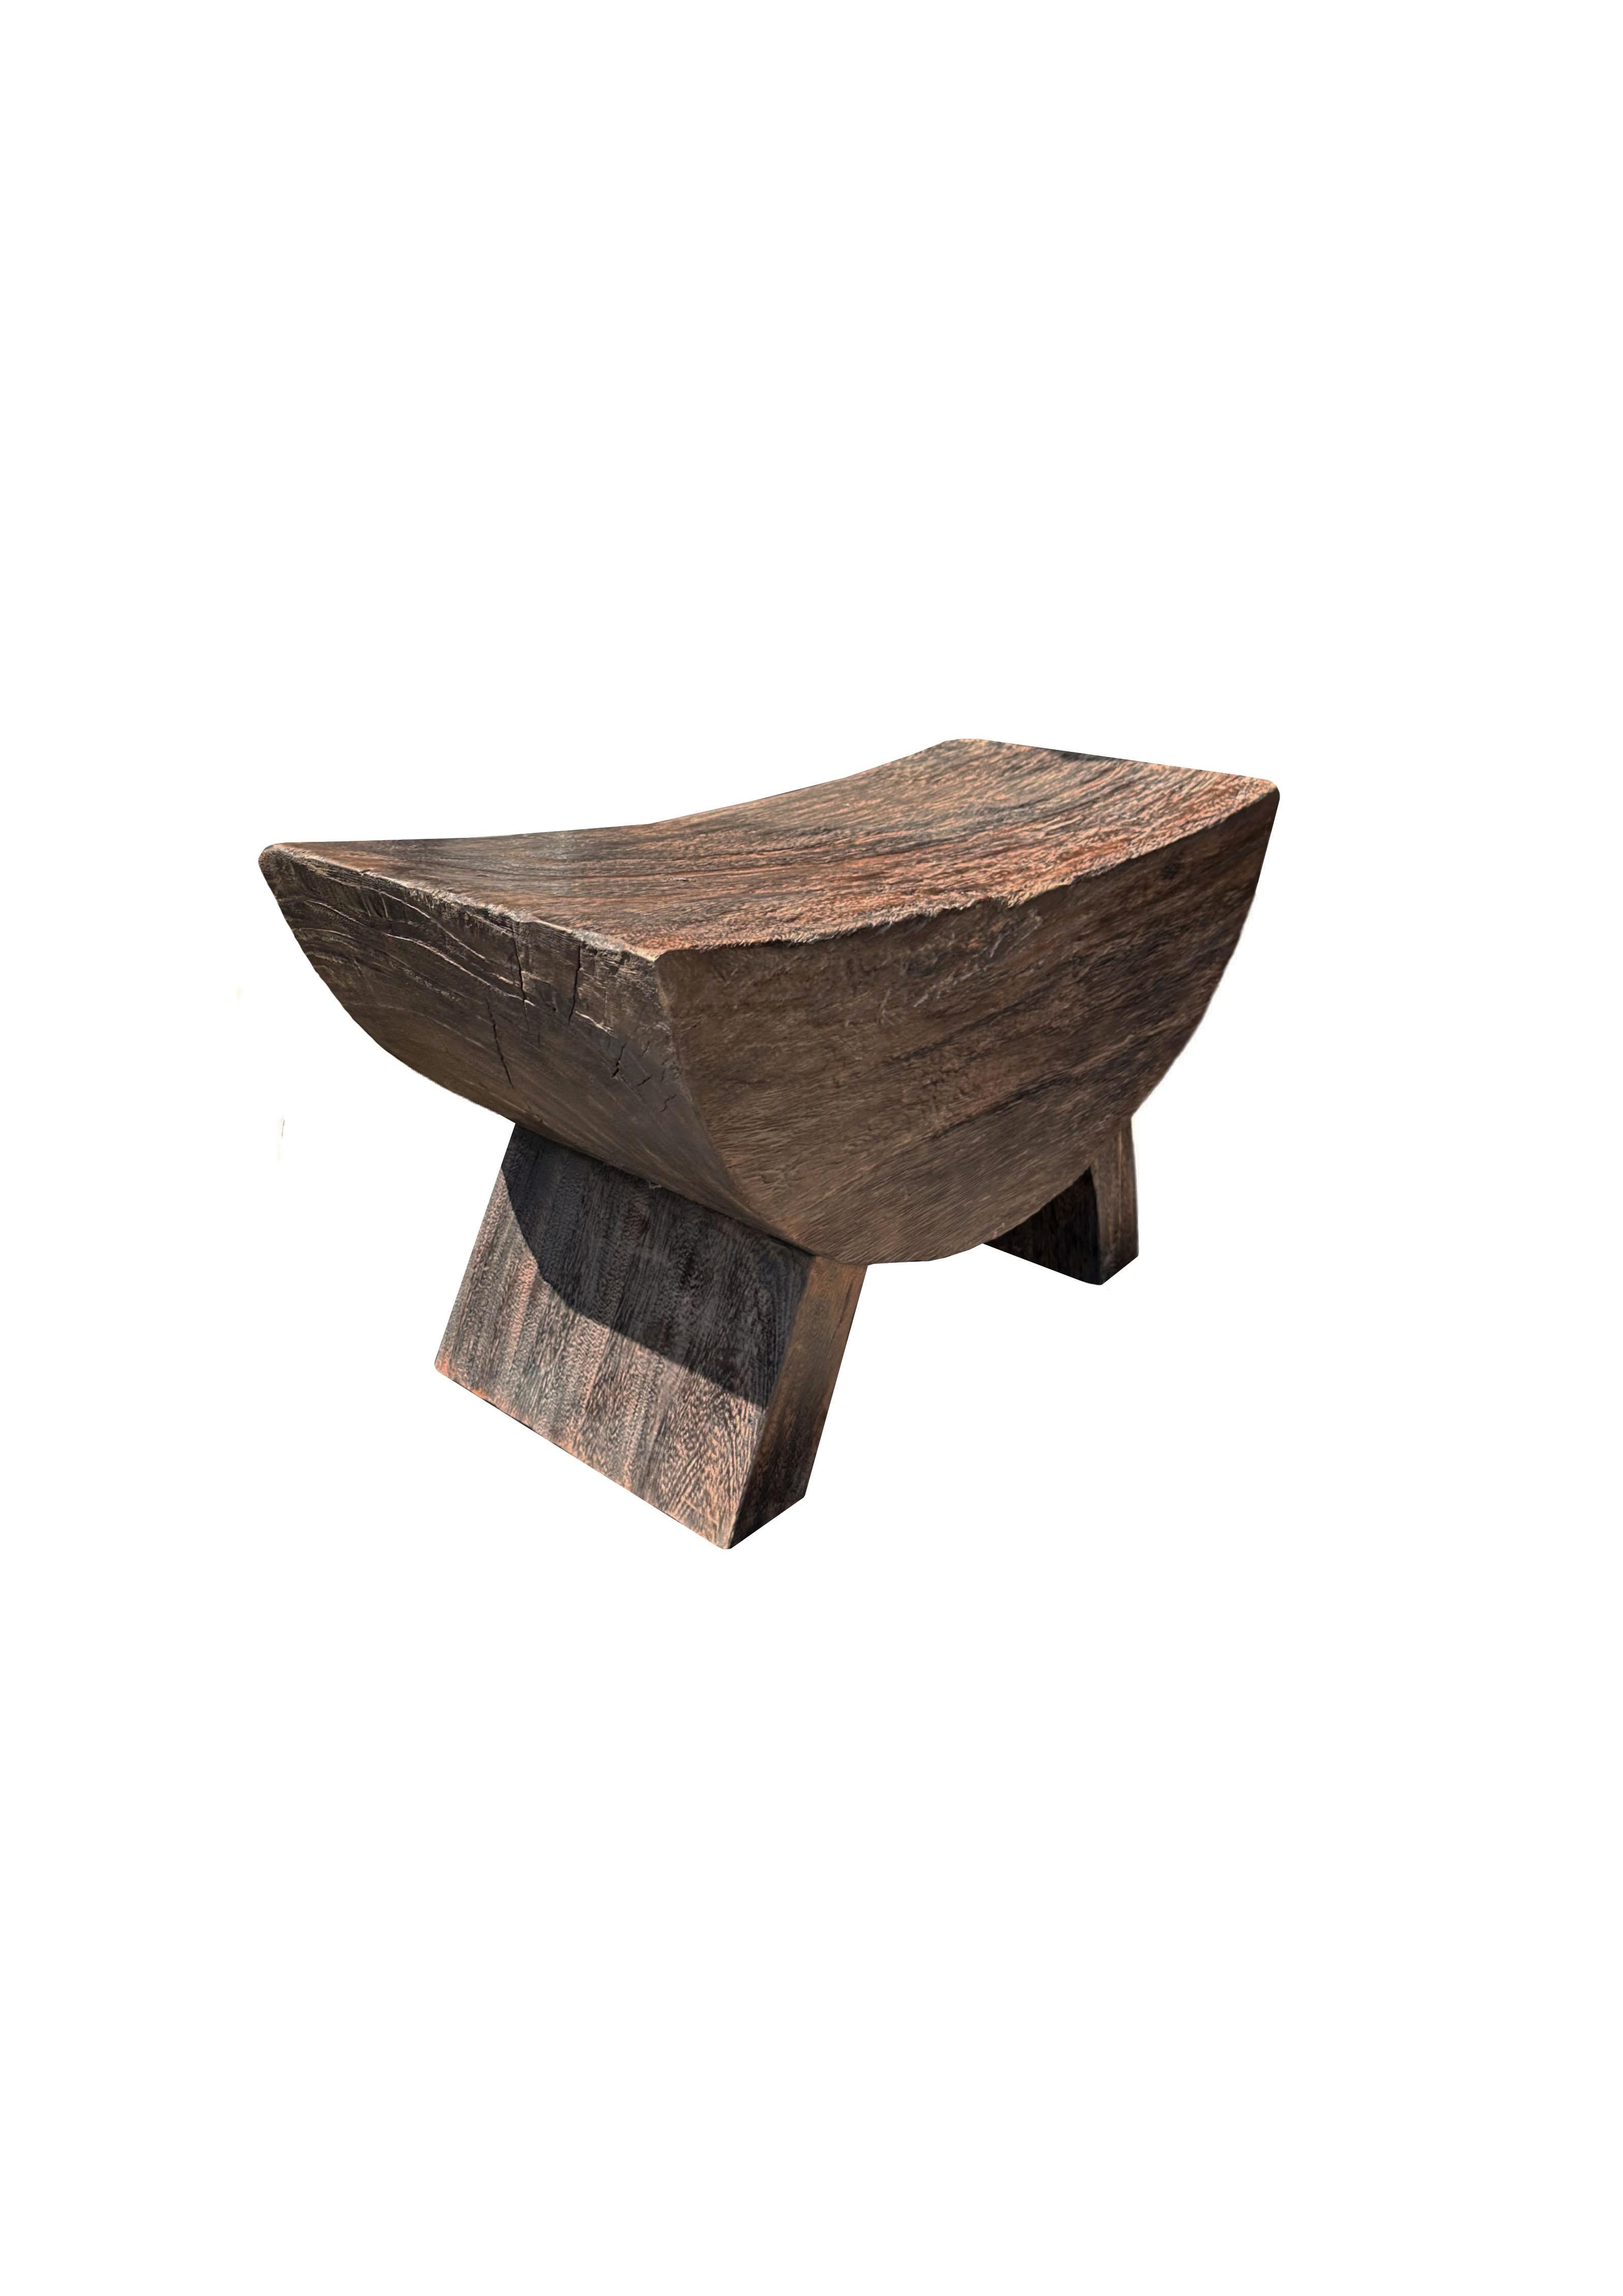 A wonderfully sculptural stool with a curved seat. The stool's neutral pigment and subtle wood texture makes it perfect for any space. A uniquely sculptural and versatile piece. This stool was crafted from Suar wood.

 